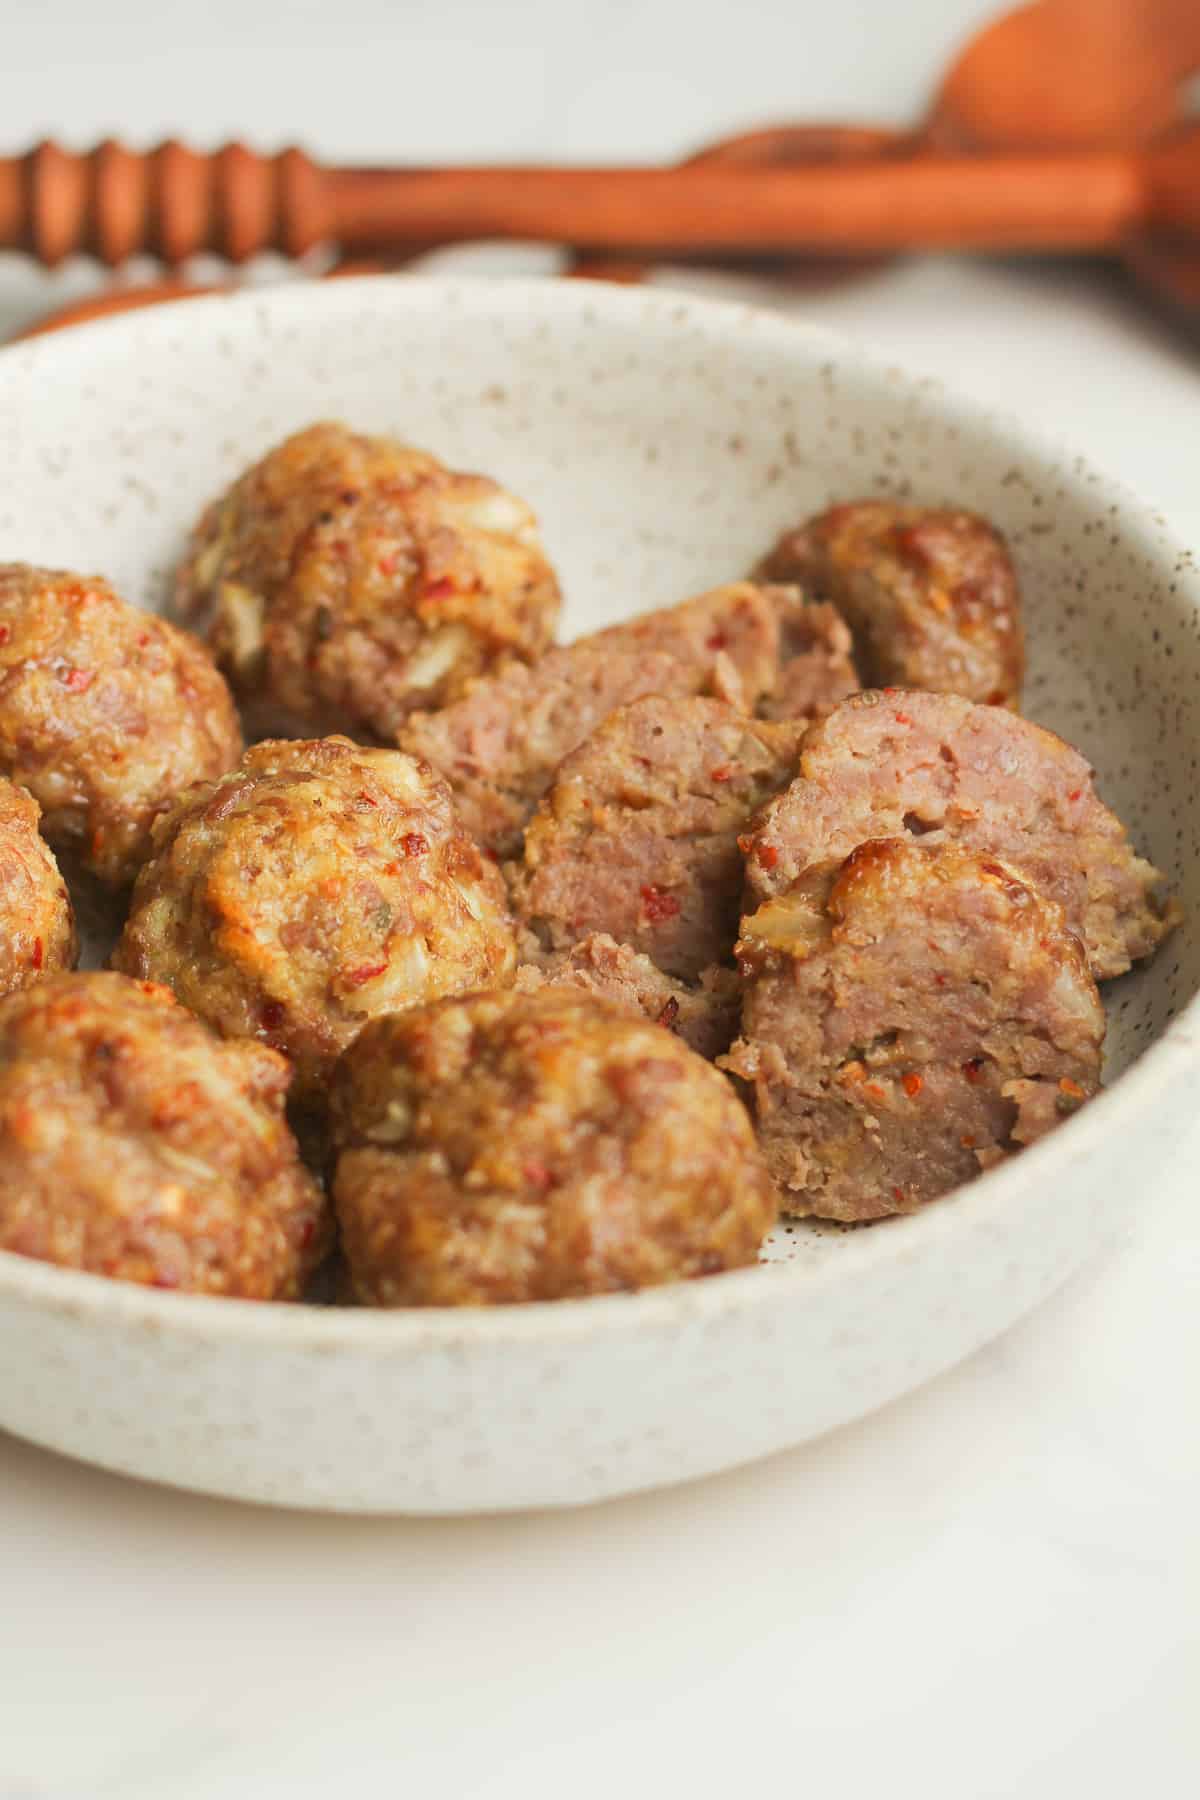 Side shot of some spicy sausage meatballs in a bowl.